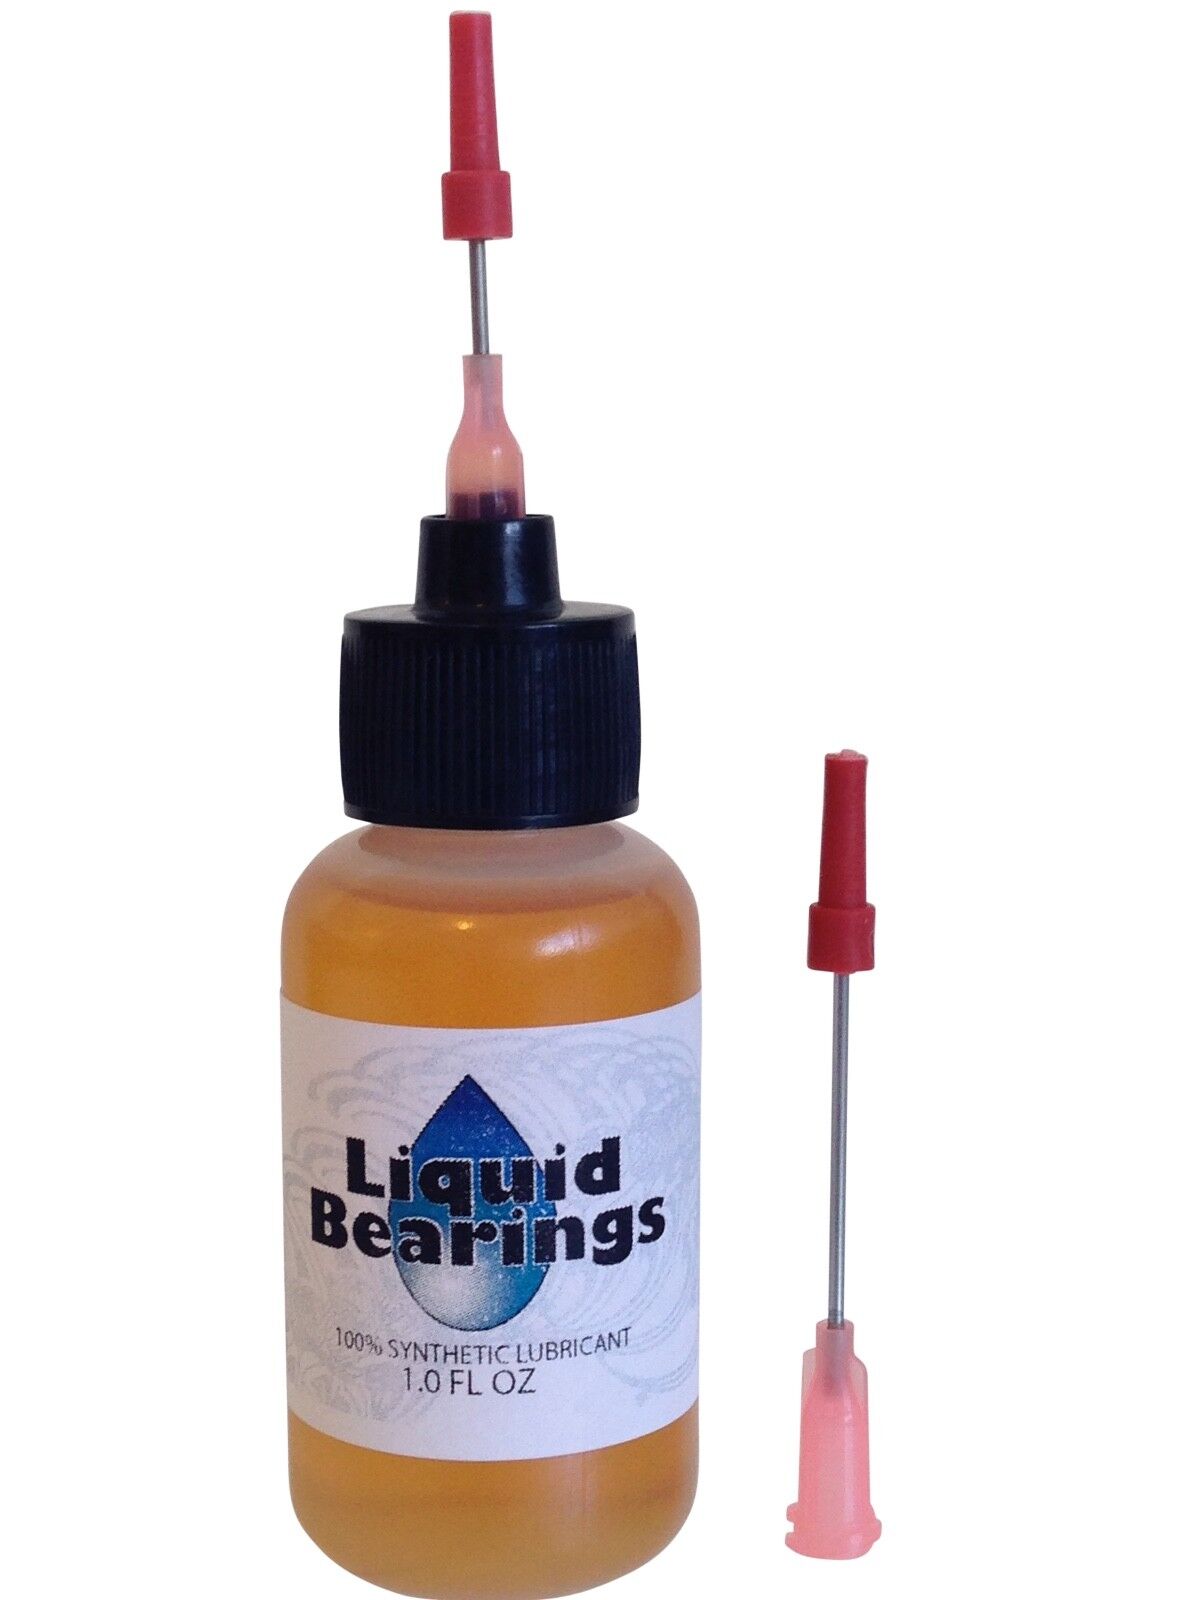 Liquid Bearings, 100%-synthetic LUBRICANT for vintage knives, includes 2 needles